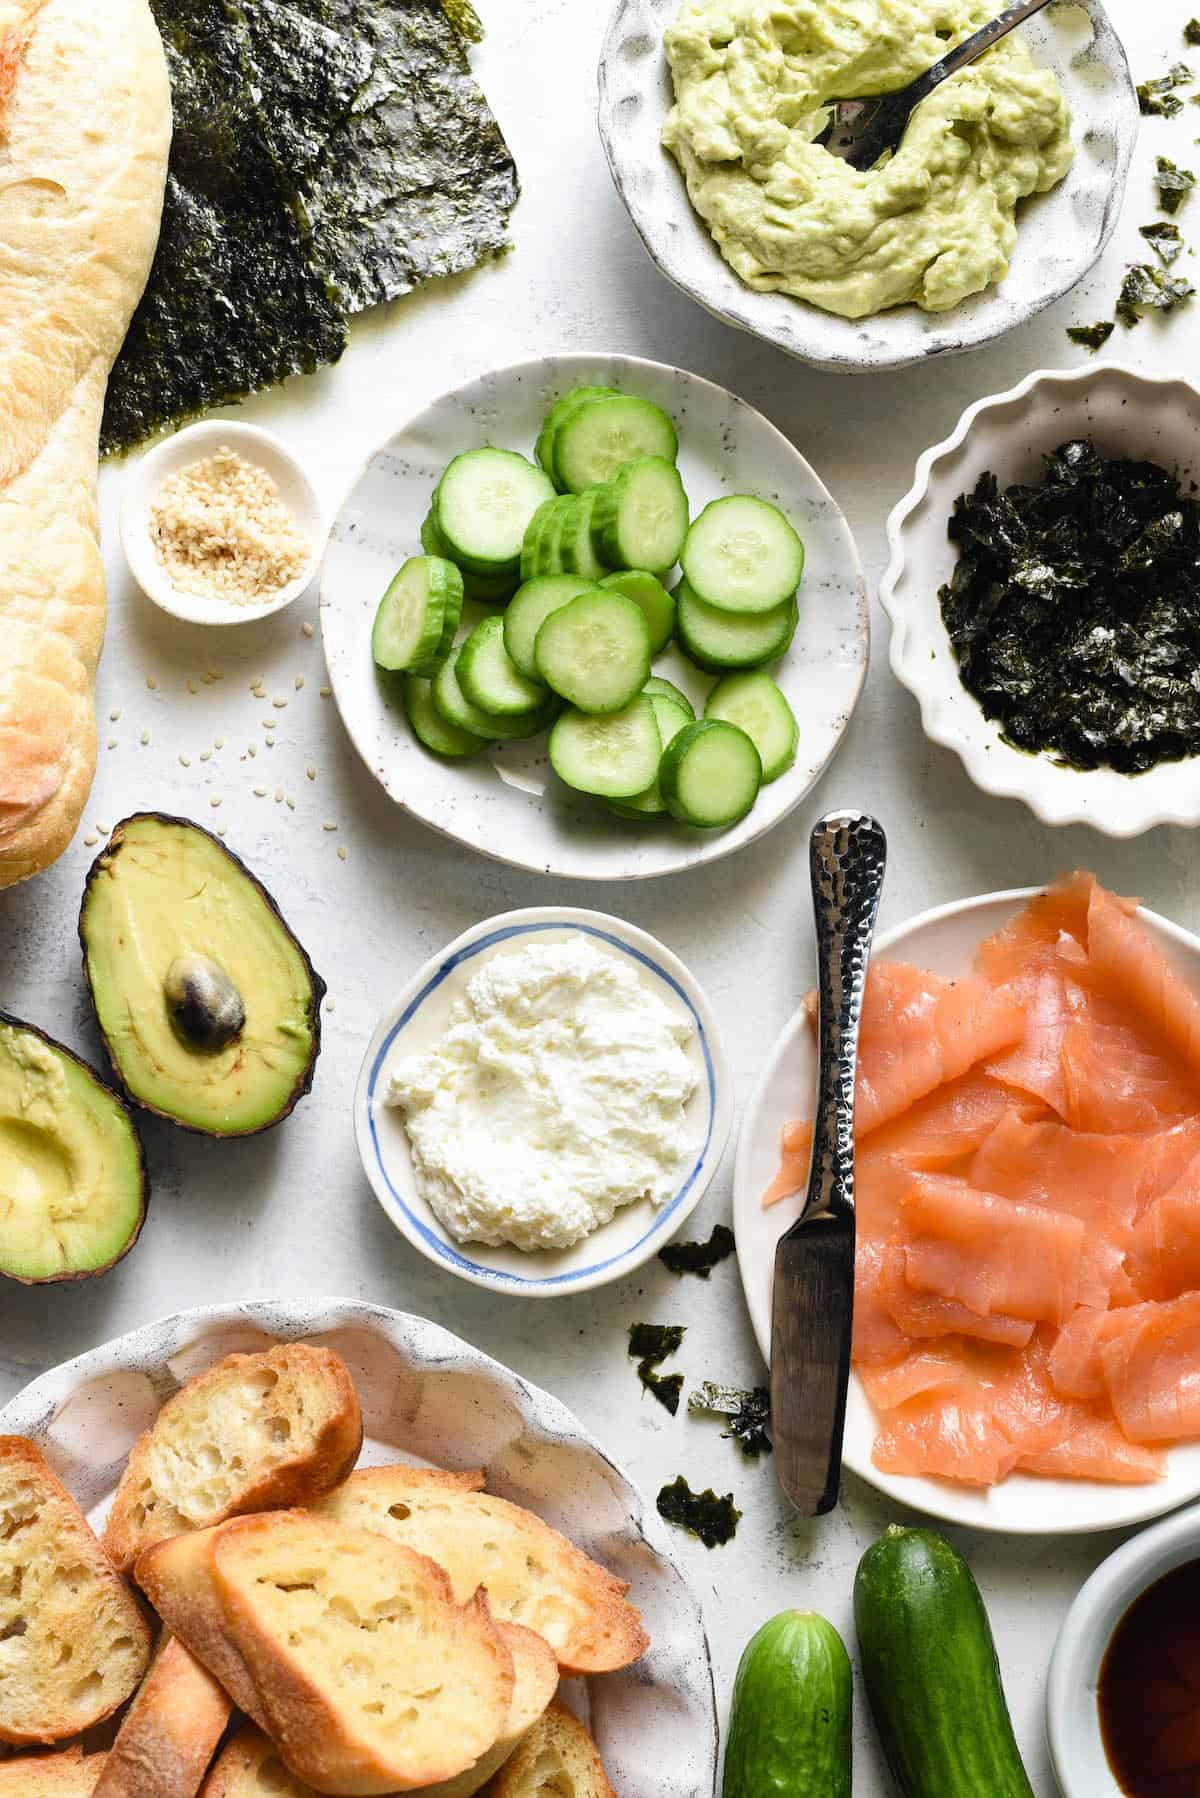 Ingredients for salmon bruschetta arranged in small bowls on white tabletop. Avocado spread, sliced cucumber, seaweed, smoked salmon, cream cheese, sesame seeds, sliced baguette.